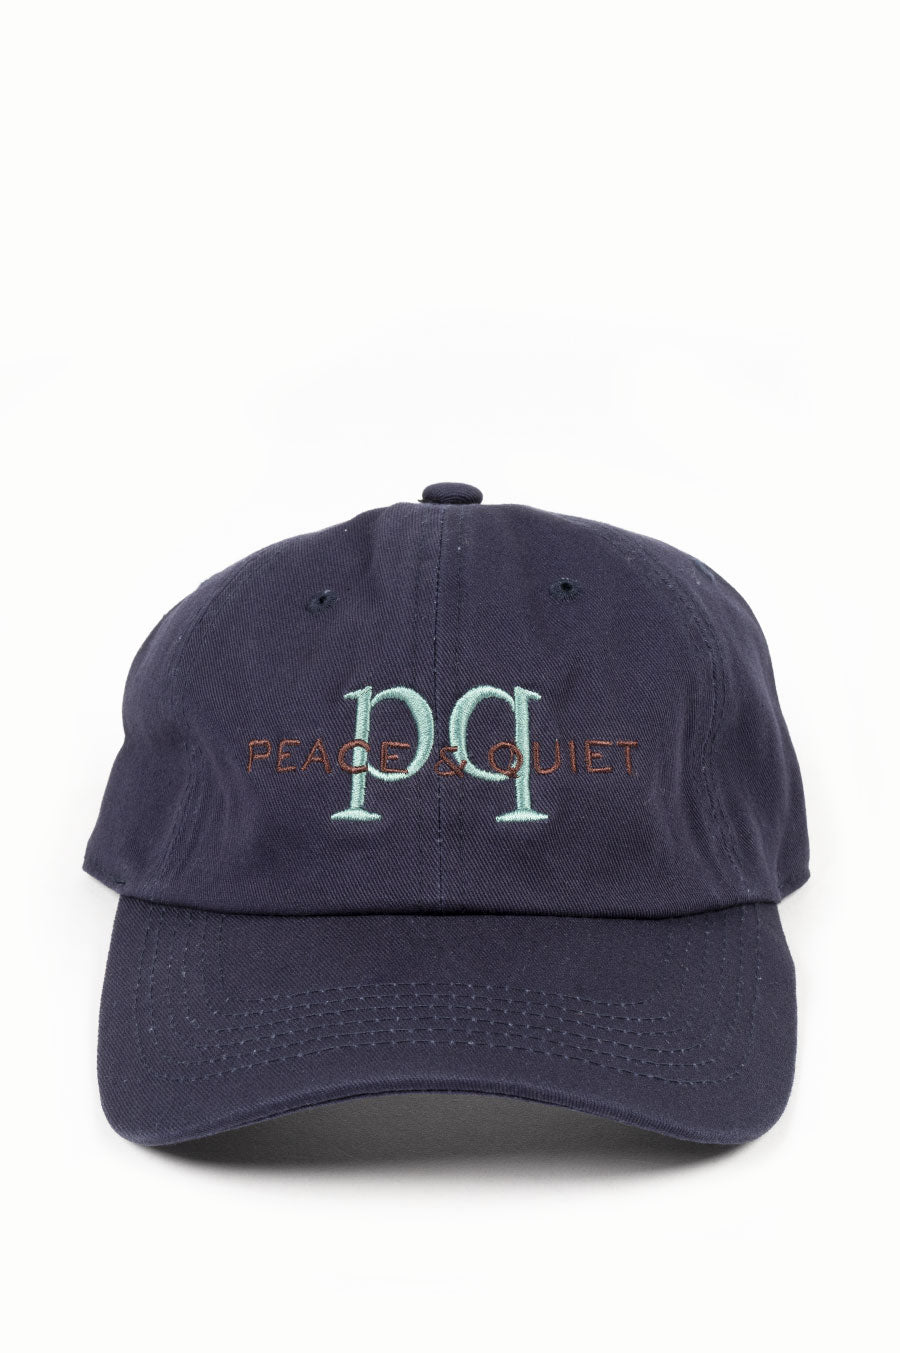 THE MUSEUM OF PEACE AND QUIET HAT LEISURE CO HAT NAVY